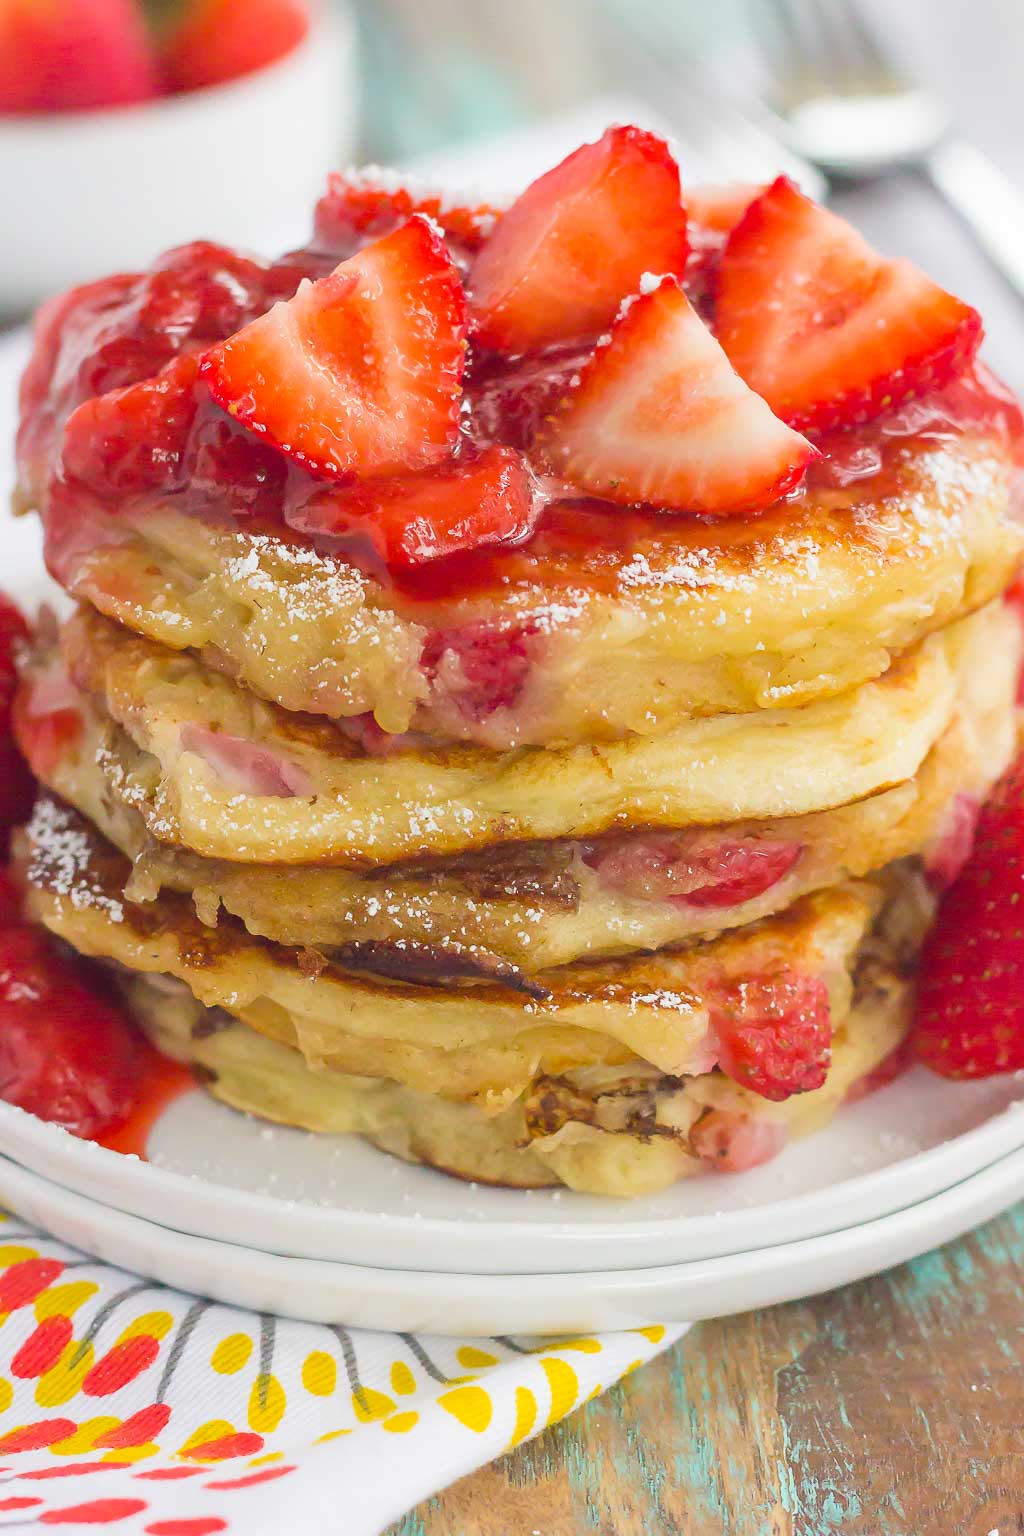 These Strawberry Greek Yogurt Pancakes are thick, fluffy, and loaded with juicy strawberries in every bite. Made with Greek yogurt for a healthier twist and topped with an easy strawberry sauce, you're going to fall in love with the sweet taste of these pancakes!